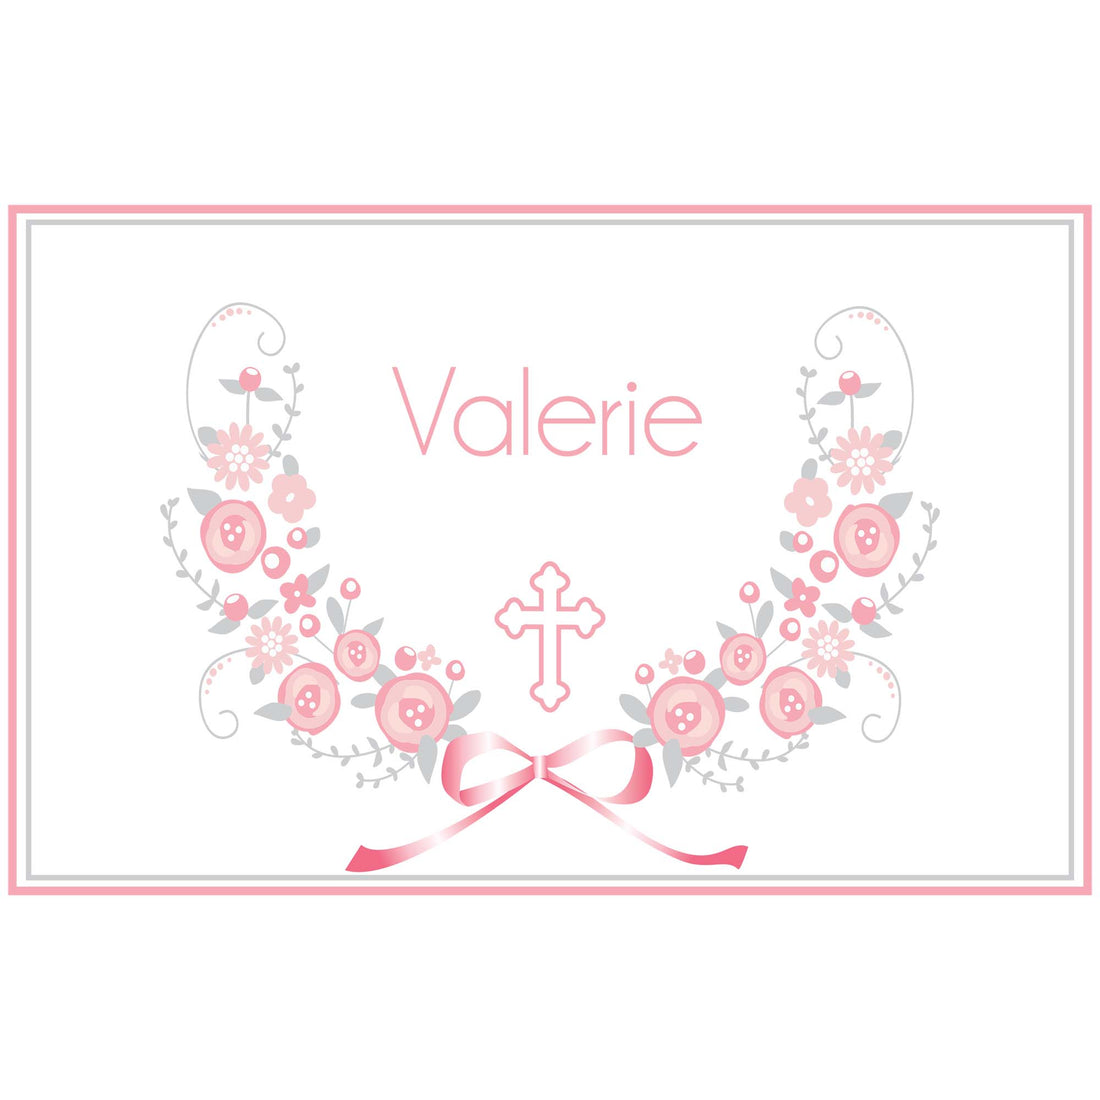 Personalized Placemat with Holy Cross Pink Gray Floral Garland design